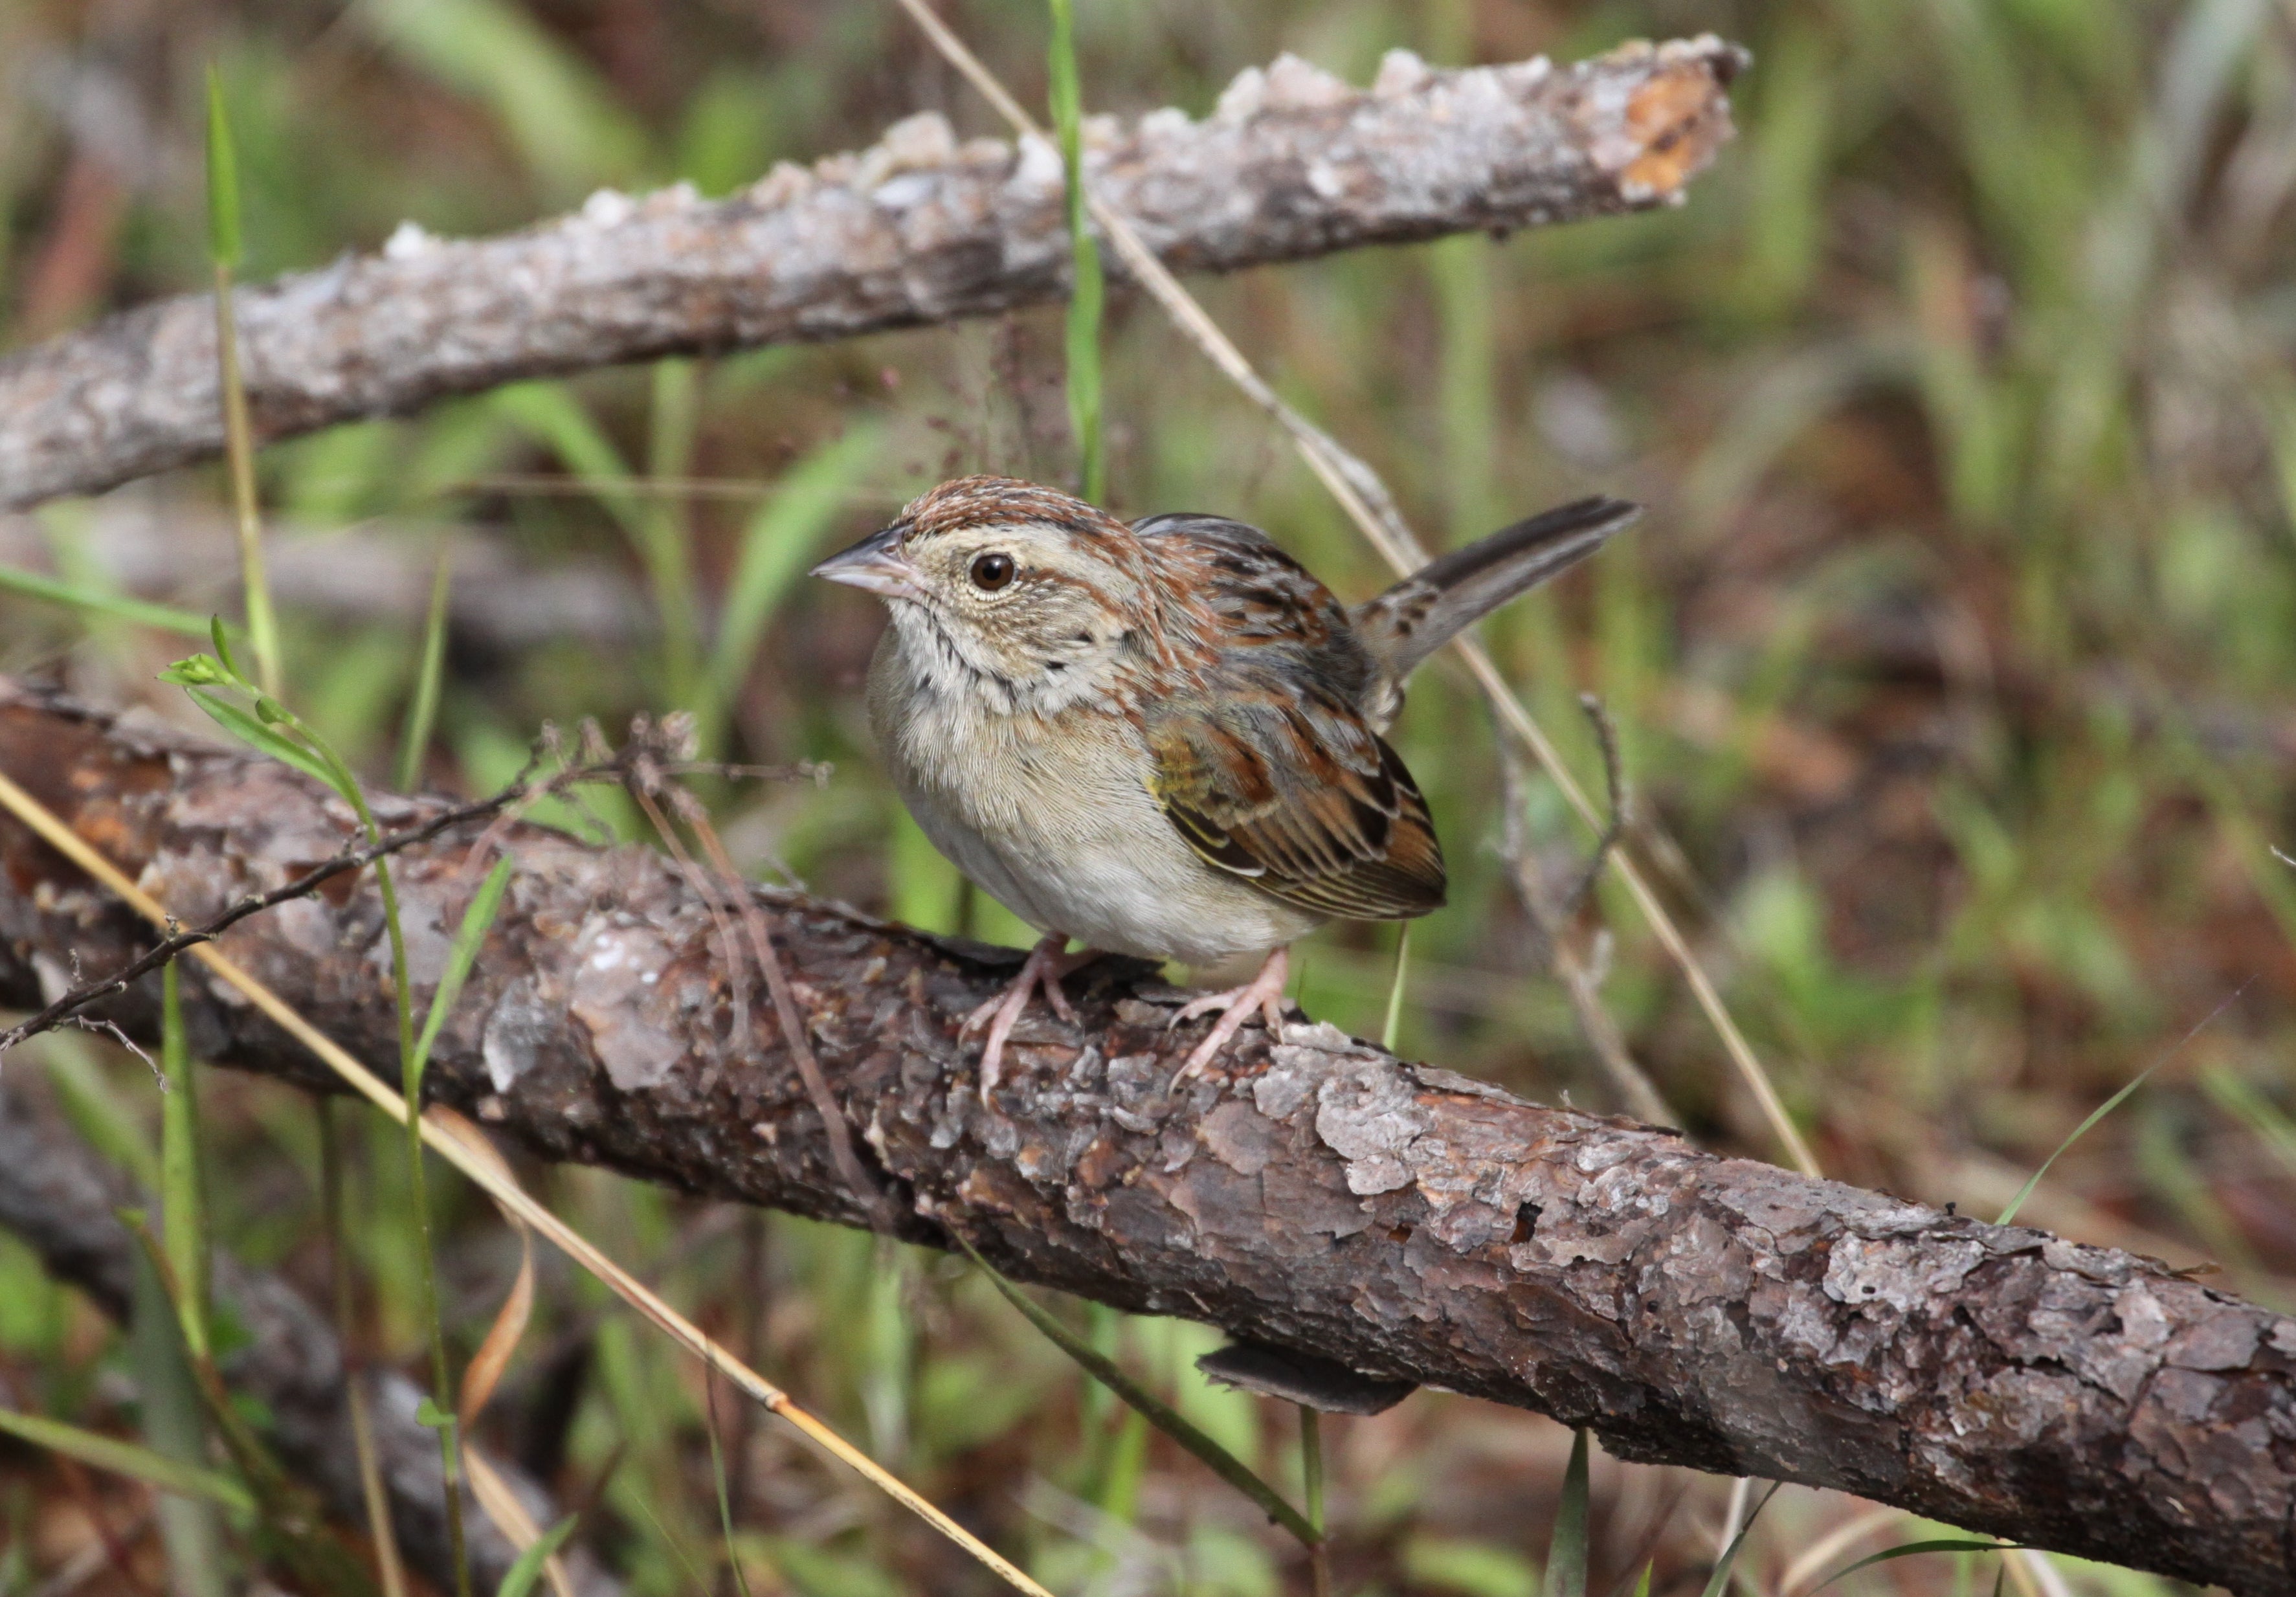 A species often sought by birders is the Bachman’s sparrow. This rare bird can found in the pine uplands of the Wehle Tract primarily during spring and summer. Photo by Eric Soehren, ADCNR